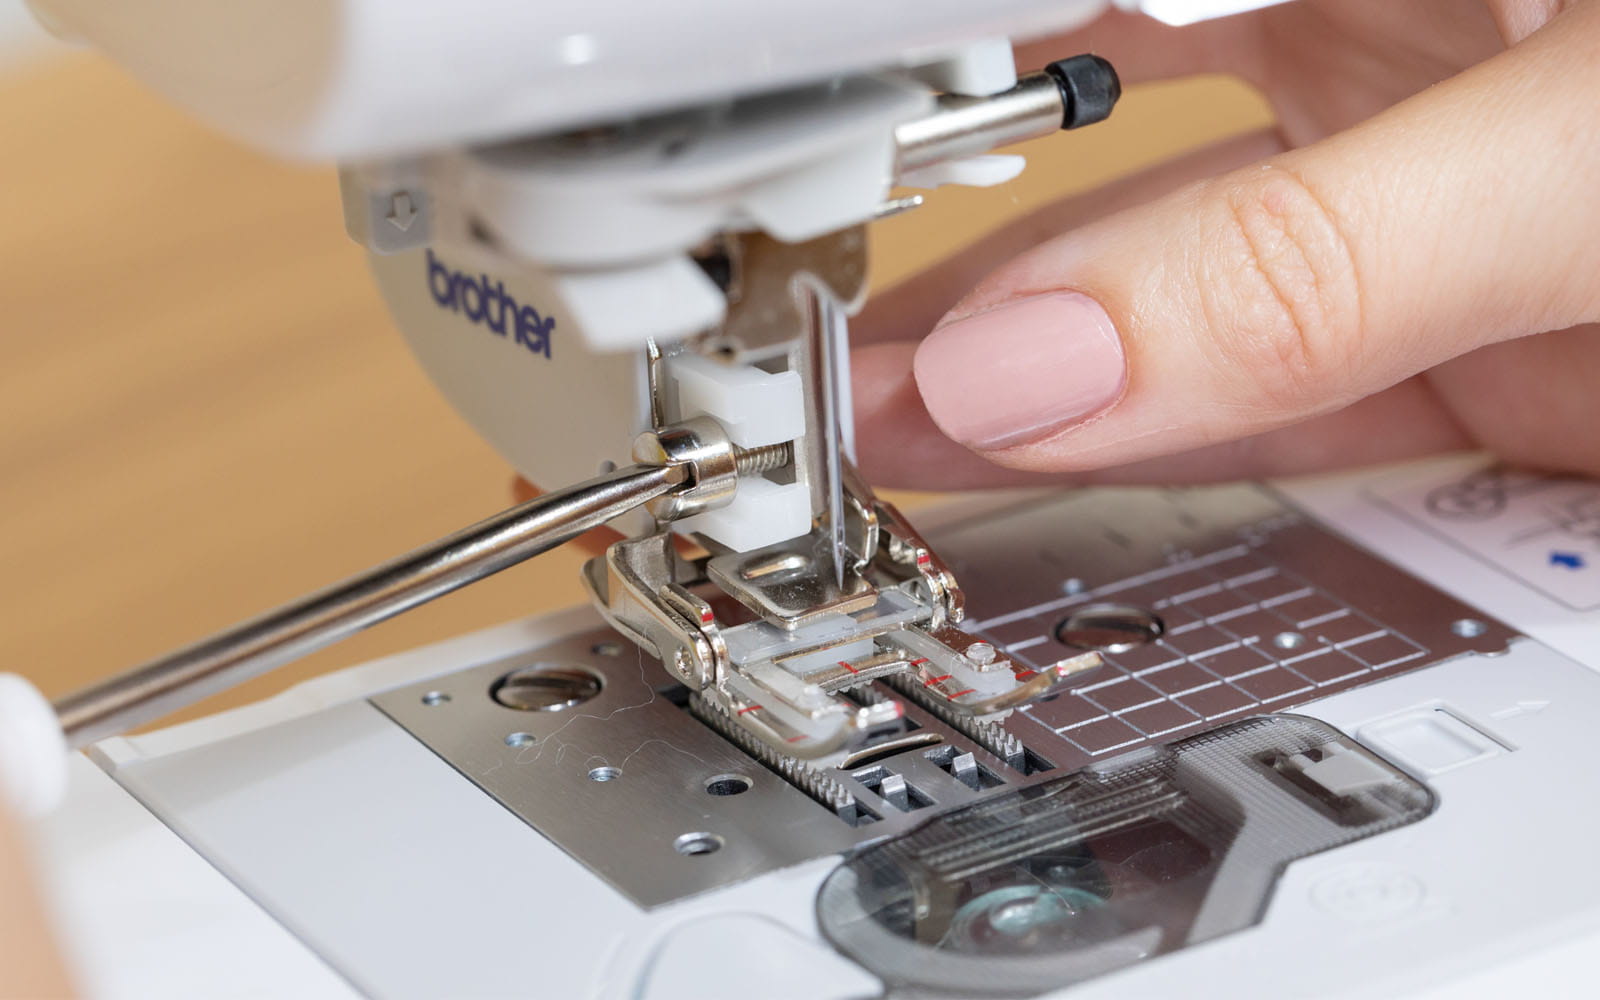 How to Thread & Use a Brother Serger in 10 Steps + Pics